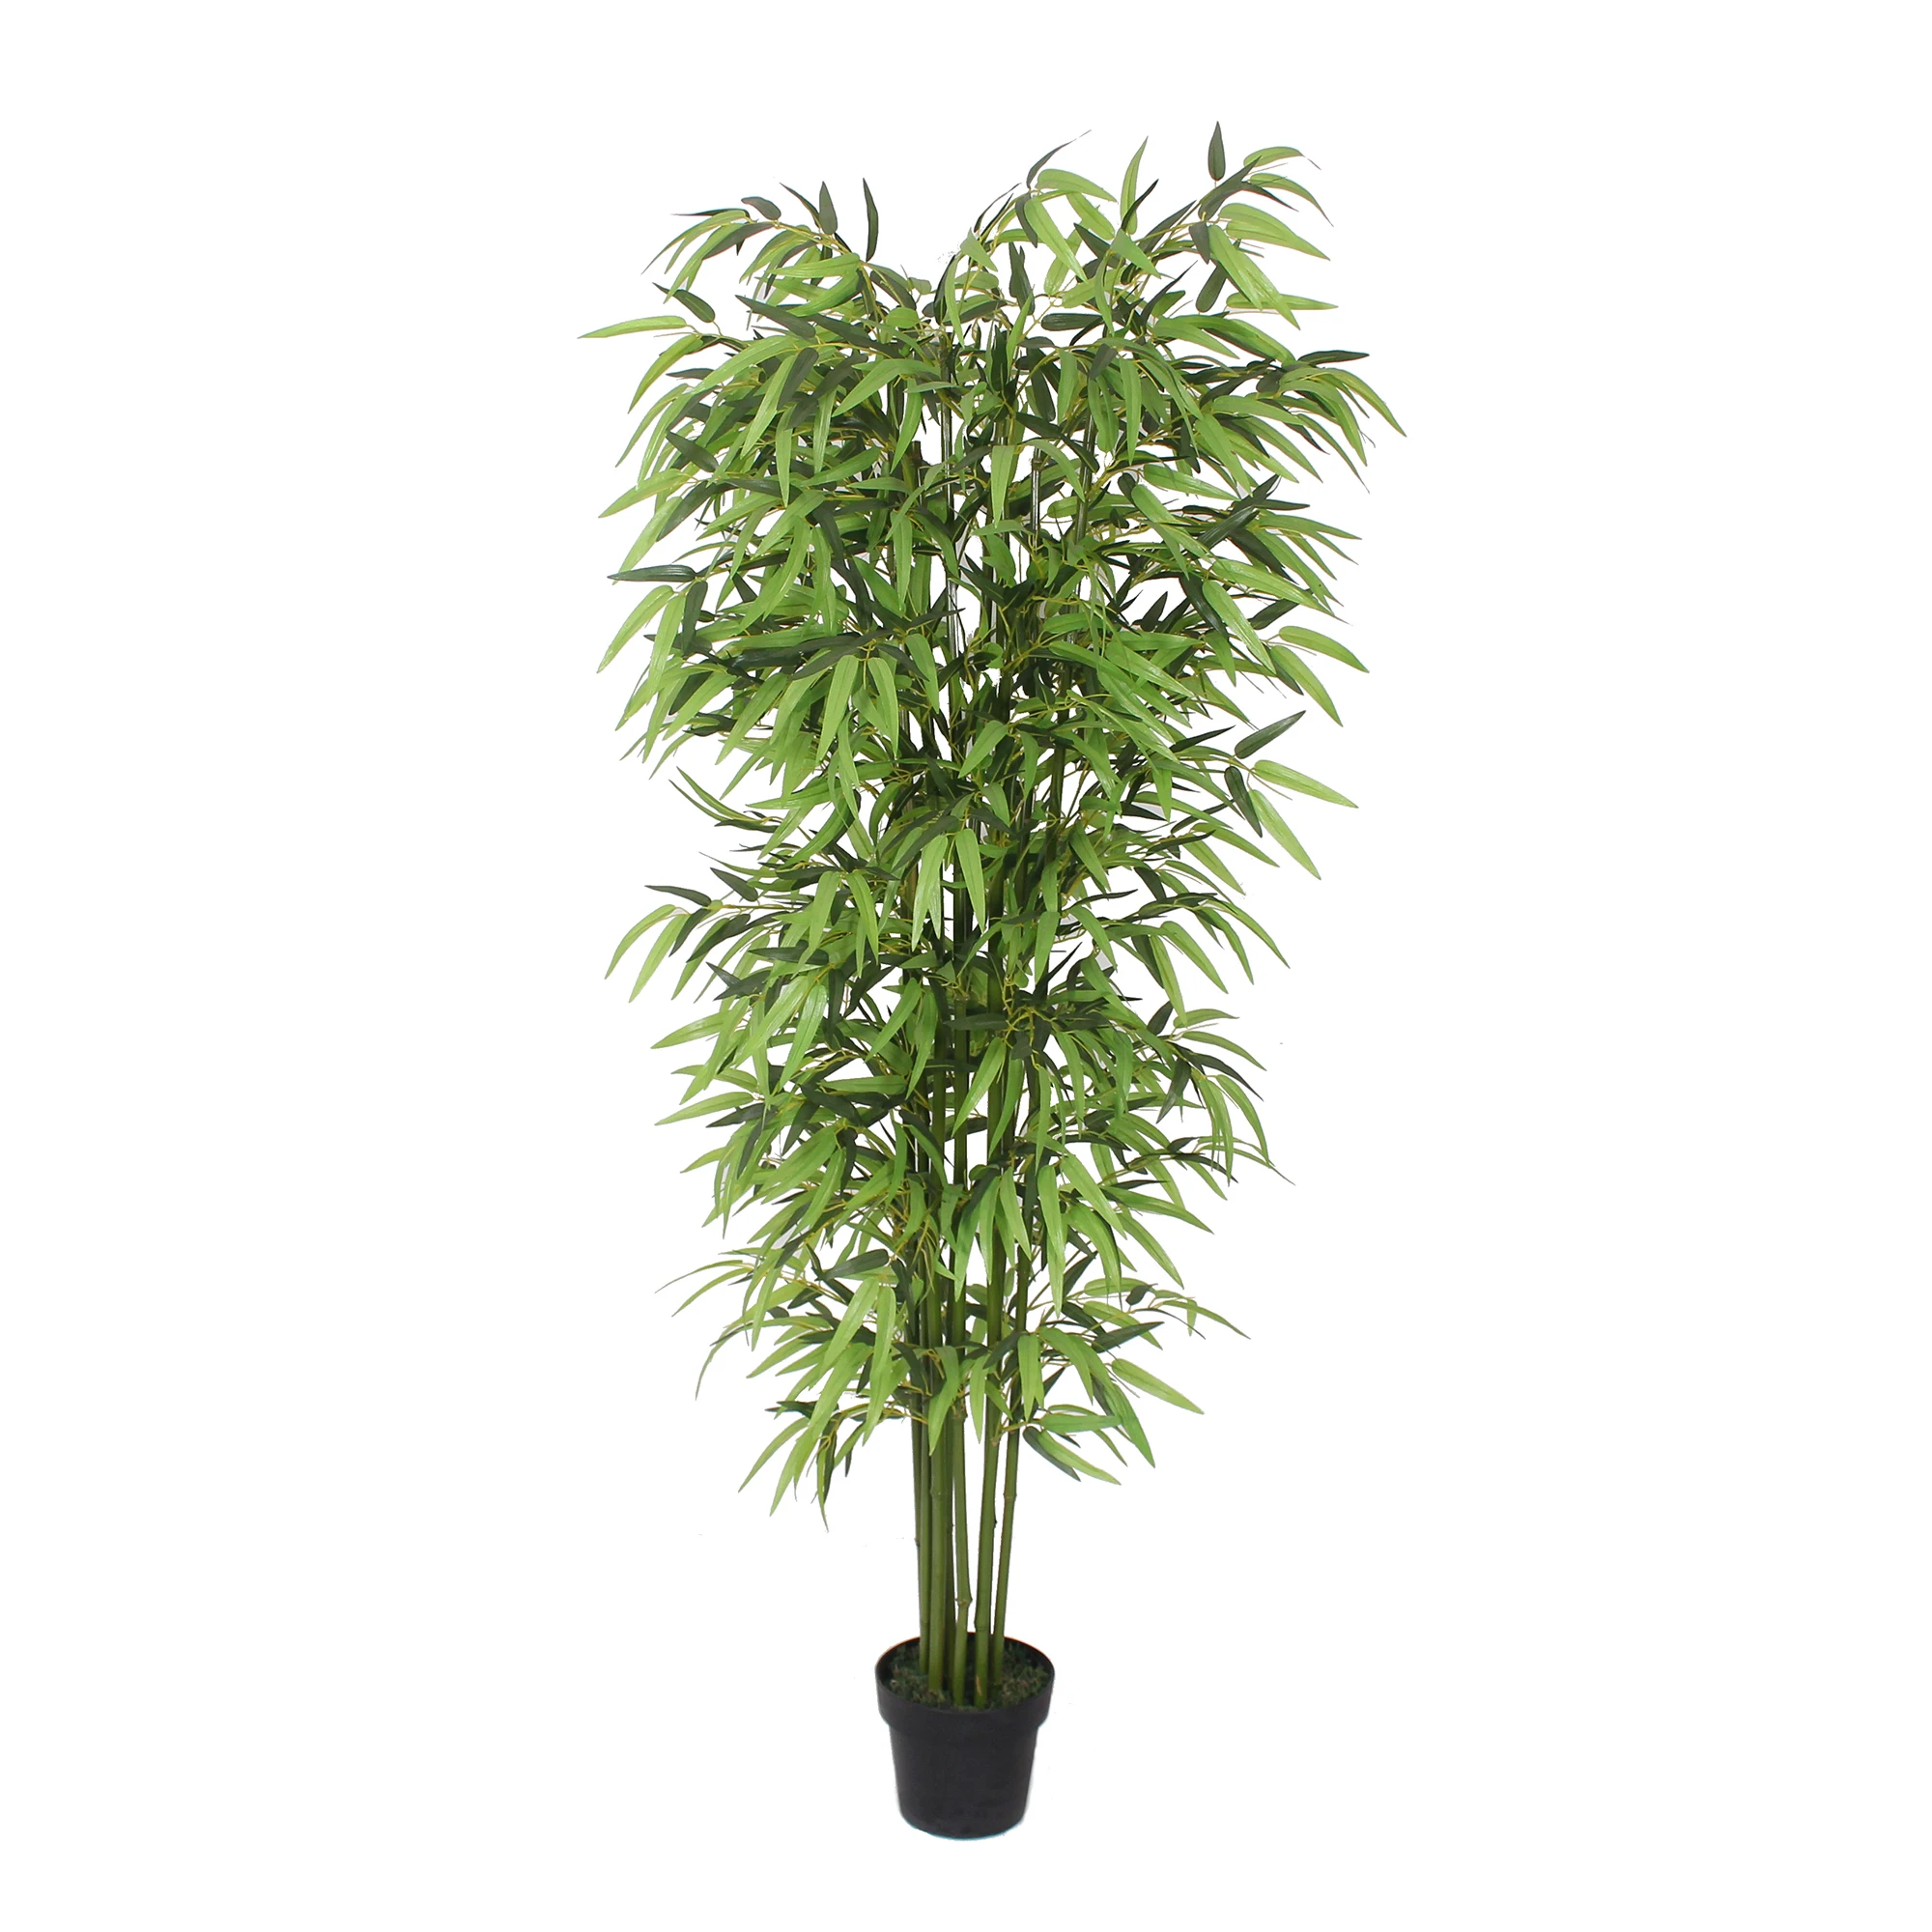 Latest product special design office use plastic artificial bamboo tree